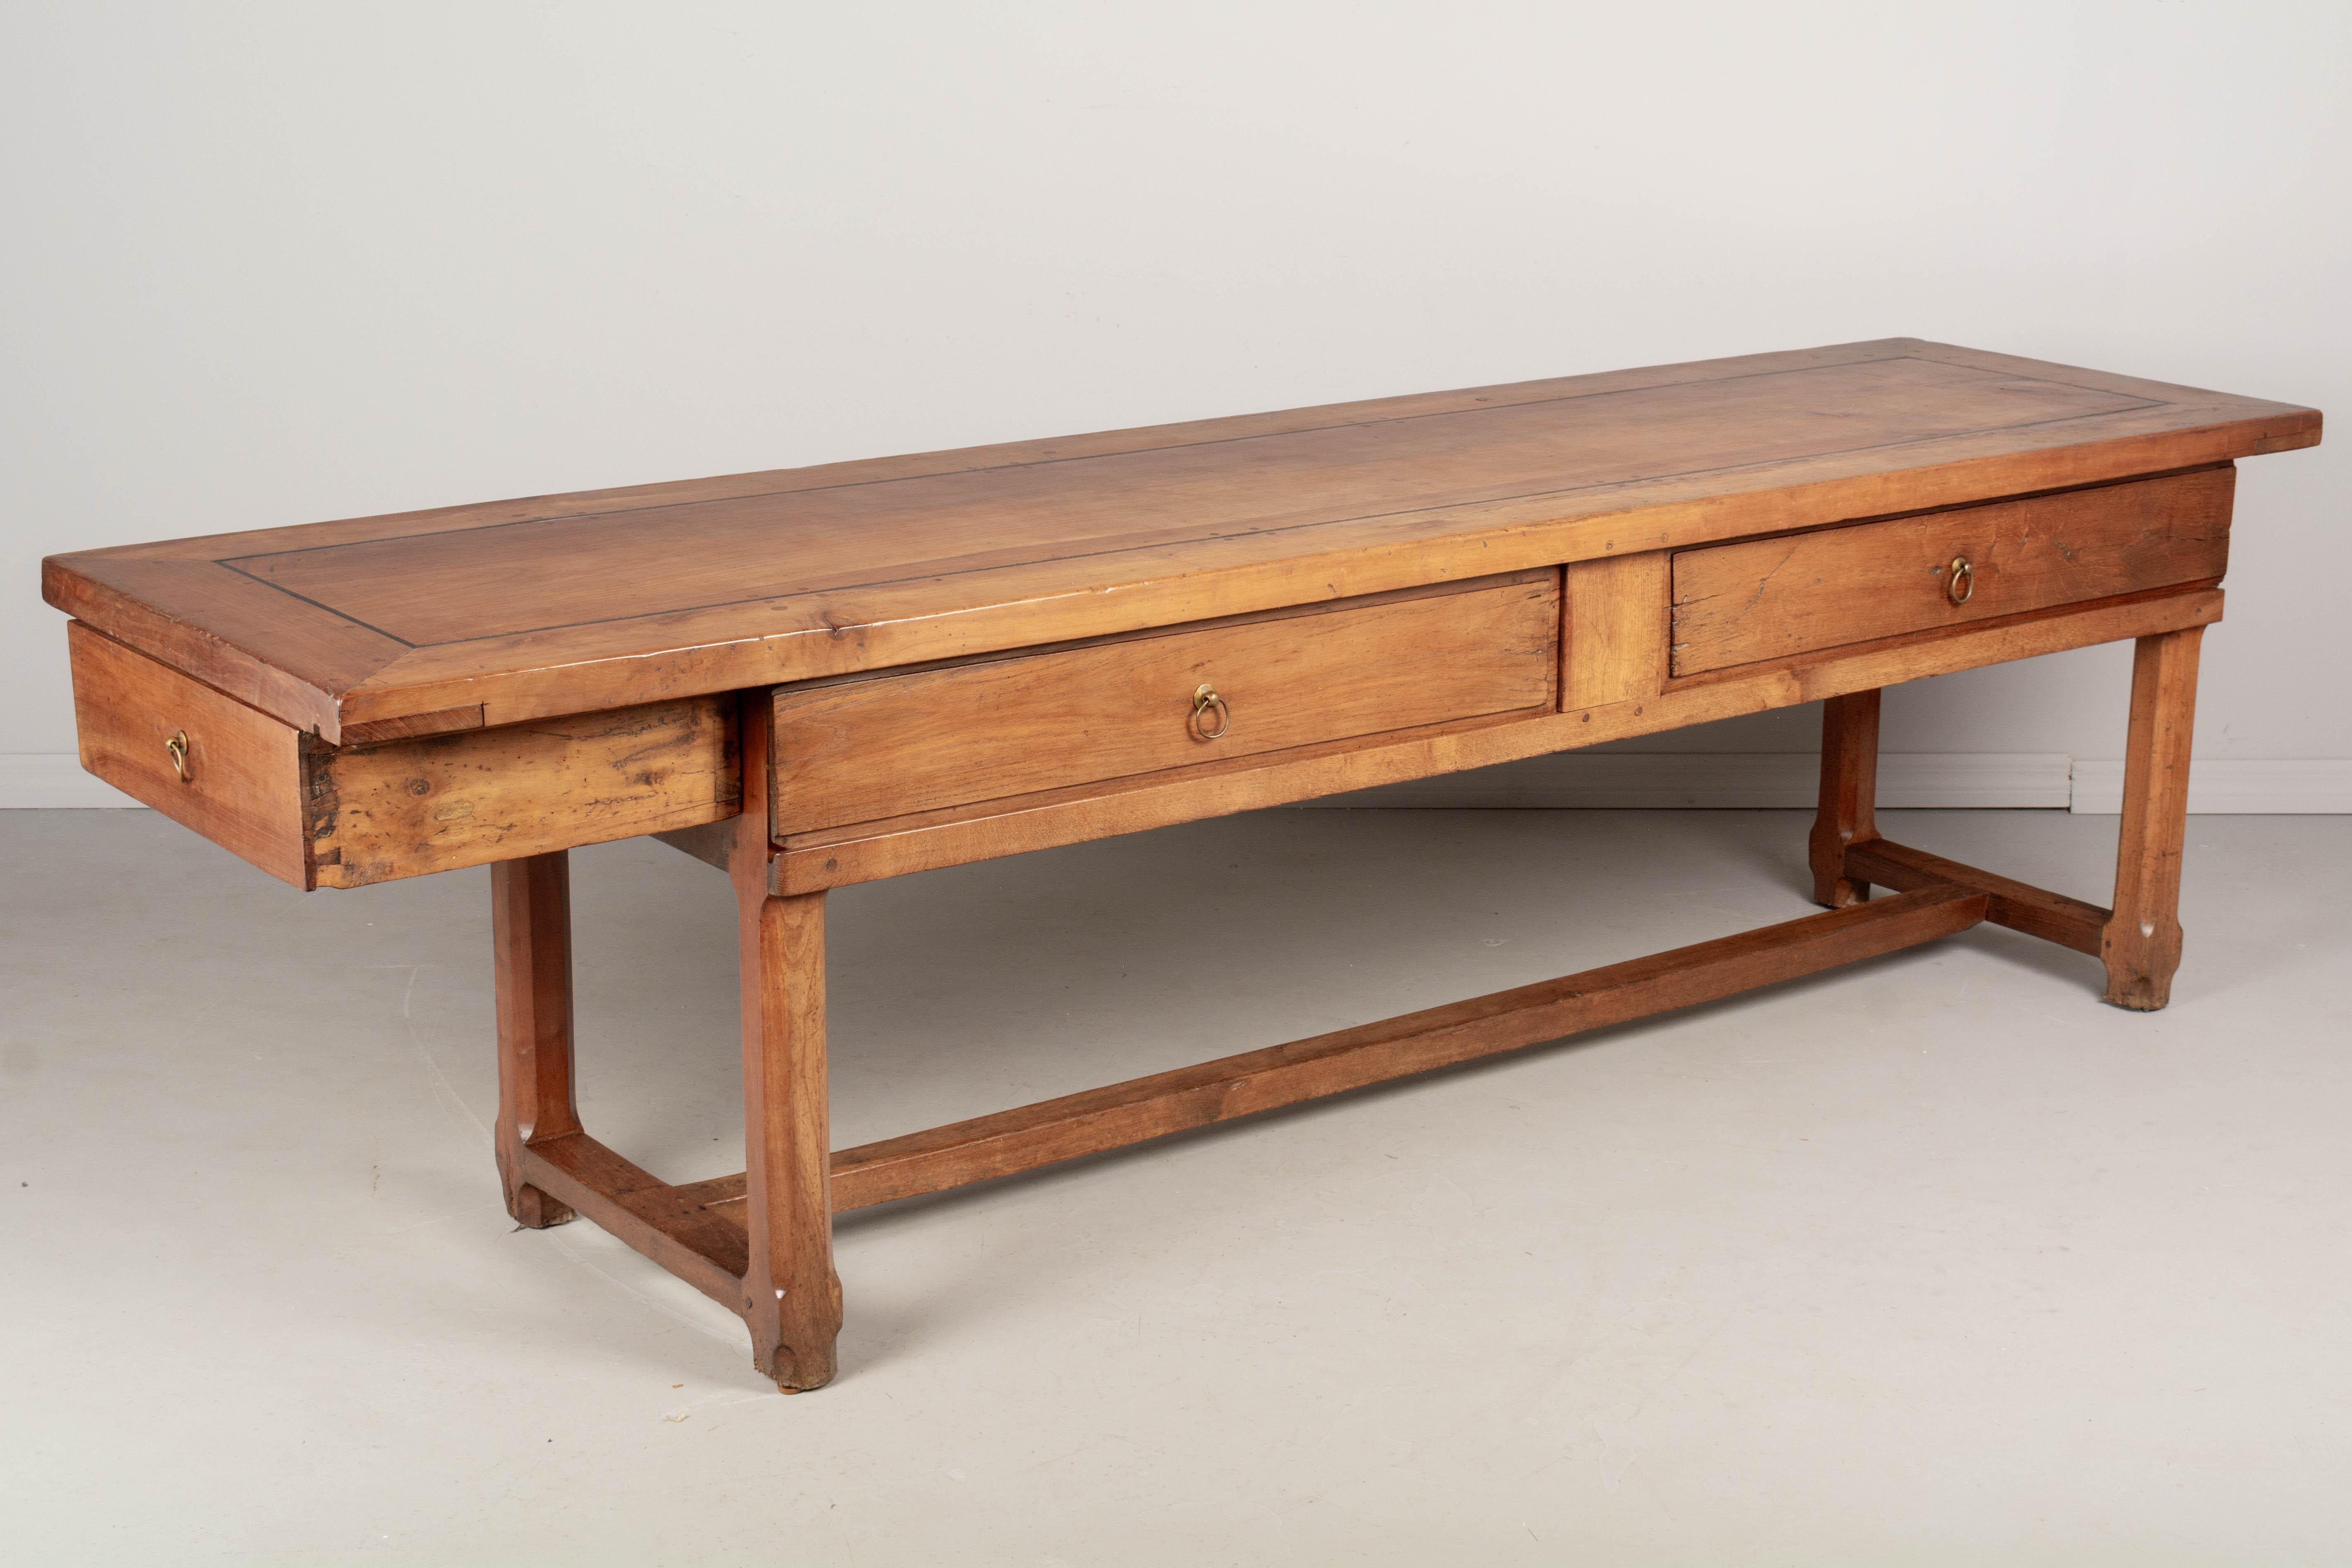 A 19th Century French Country farm table or work table from Normandy. Made of solid cherry wood with two sliding doors along the front and one deep dovetailed drawer at the end, each with brass ring pulls. The top is made from a 2